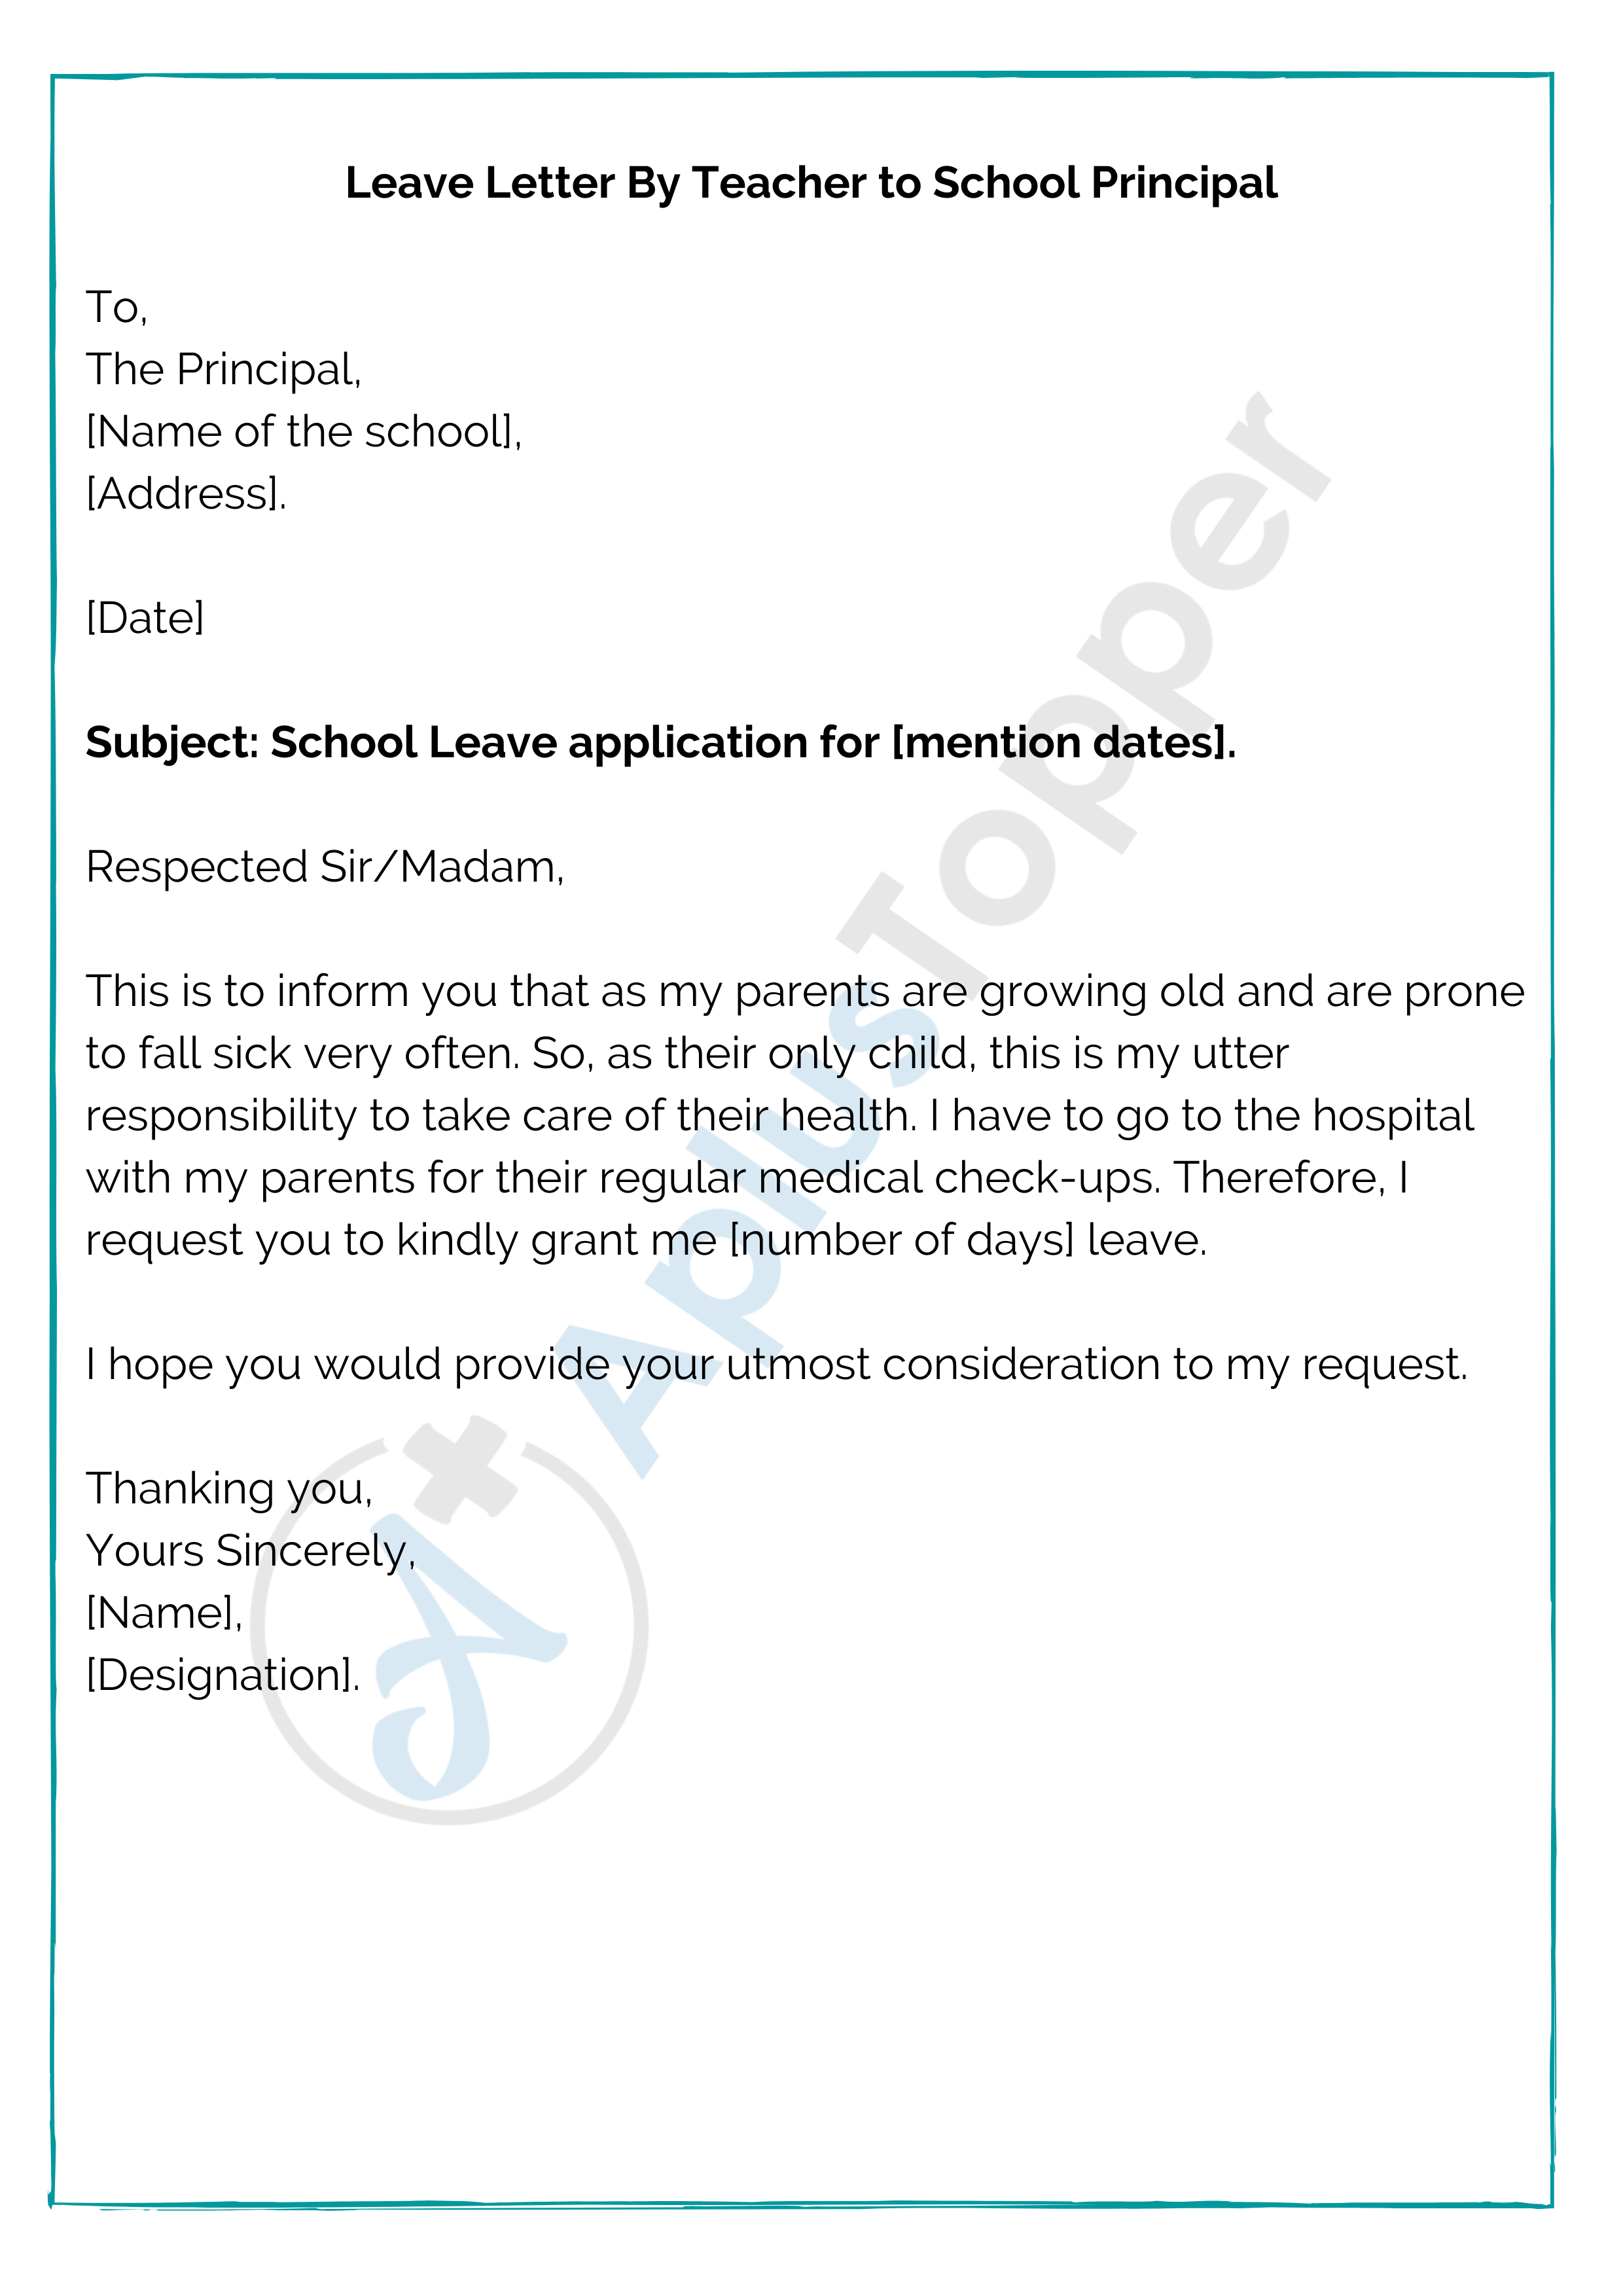 Leave Letter for School  How to Write a Leave Application for